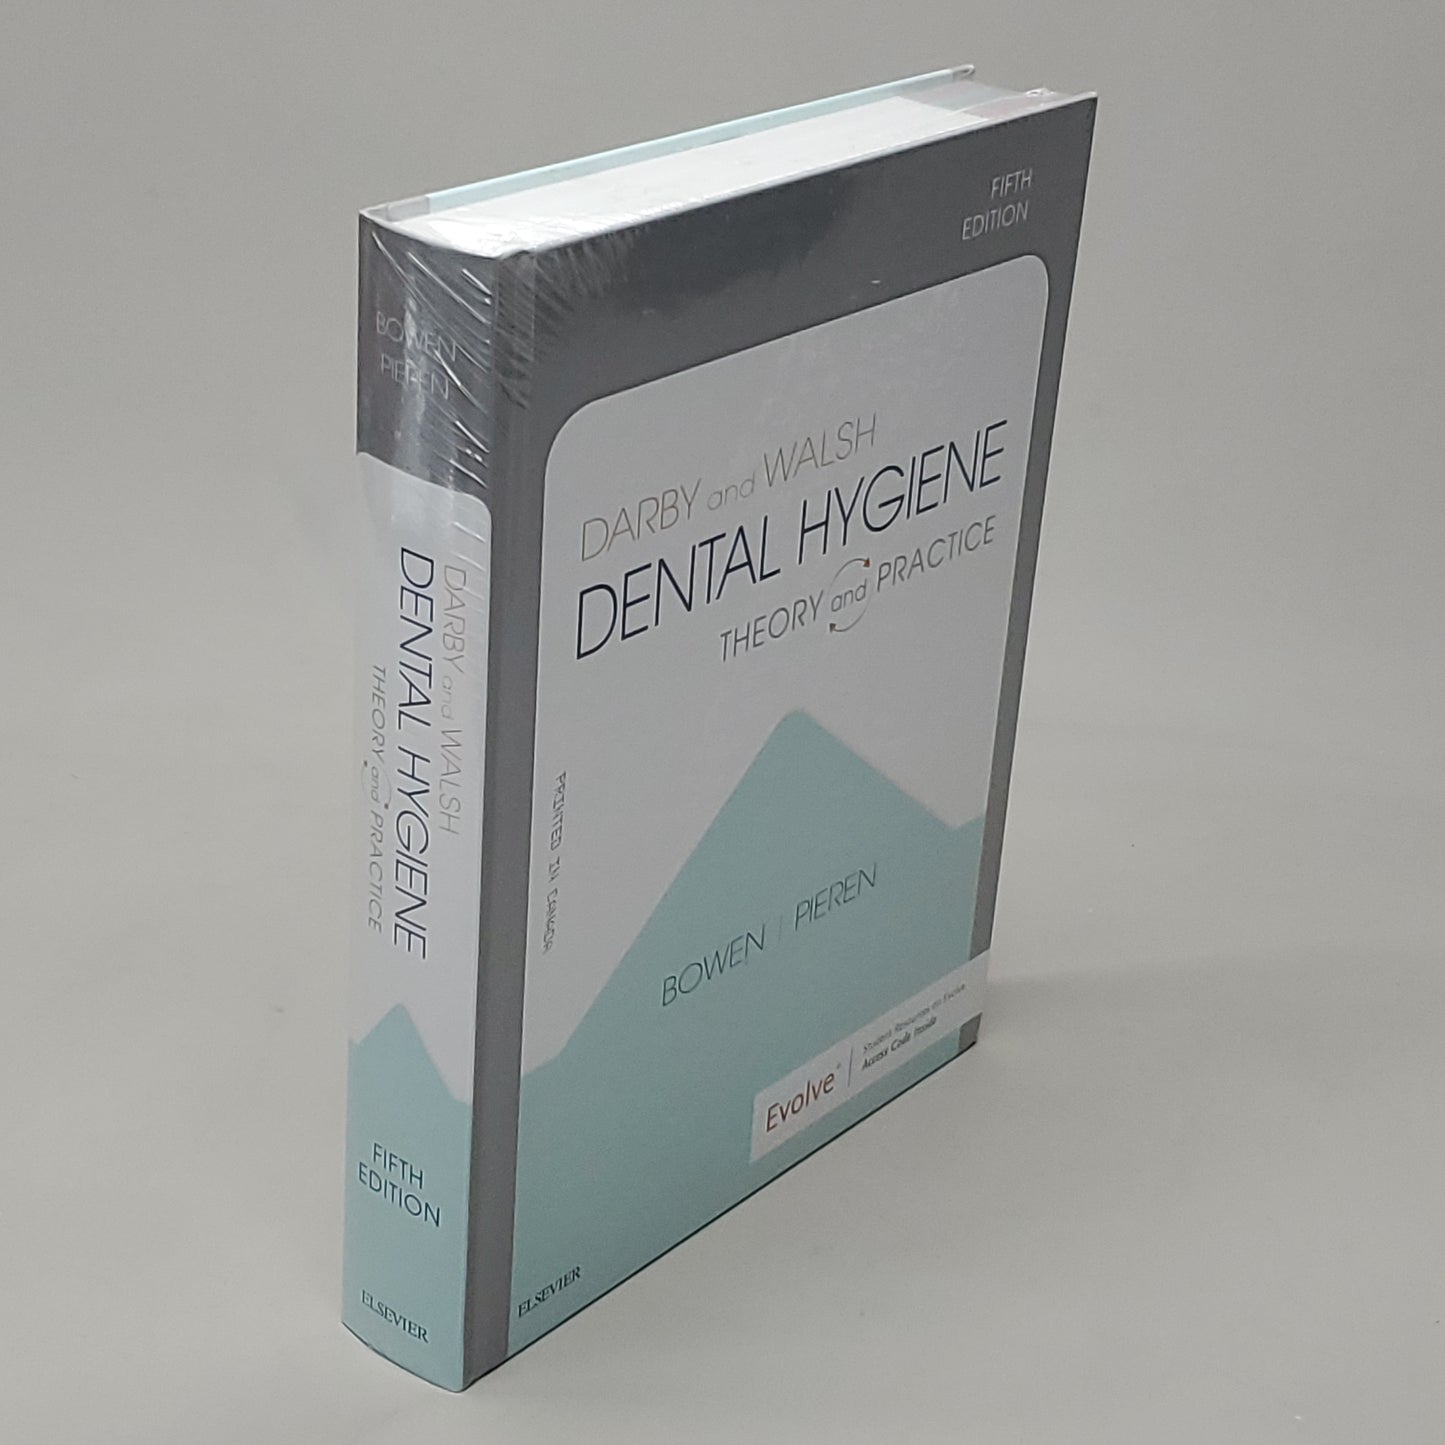 DARBY & WALSH Dental Hygiene Theory & Practice 5th Edition Textbook (New)